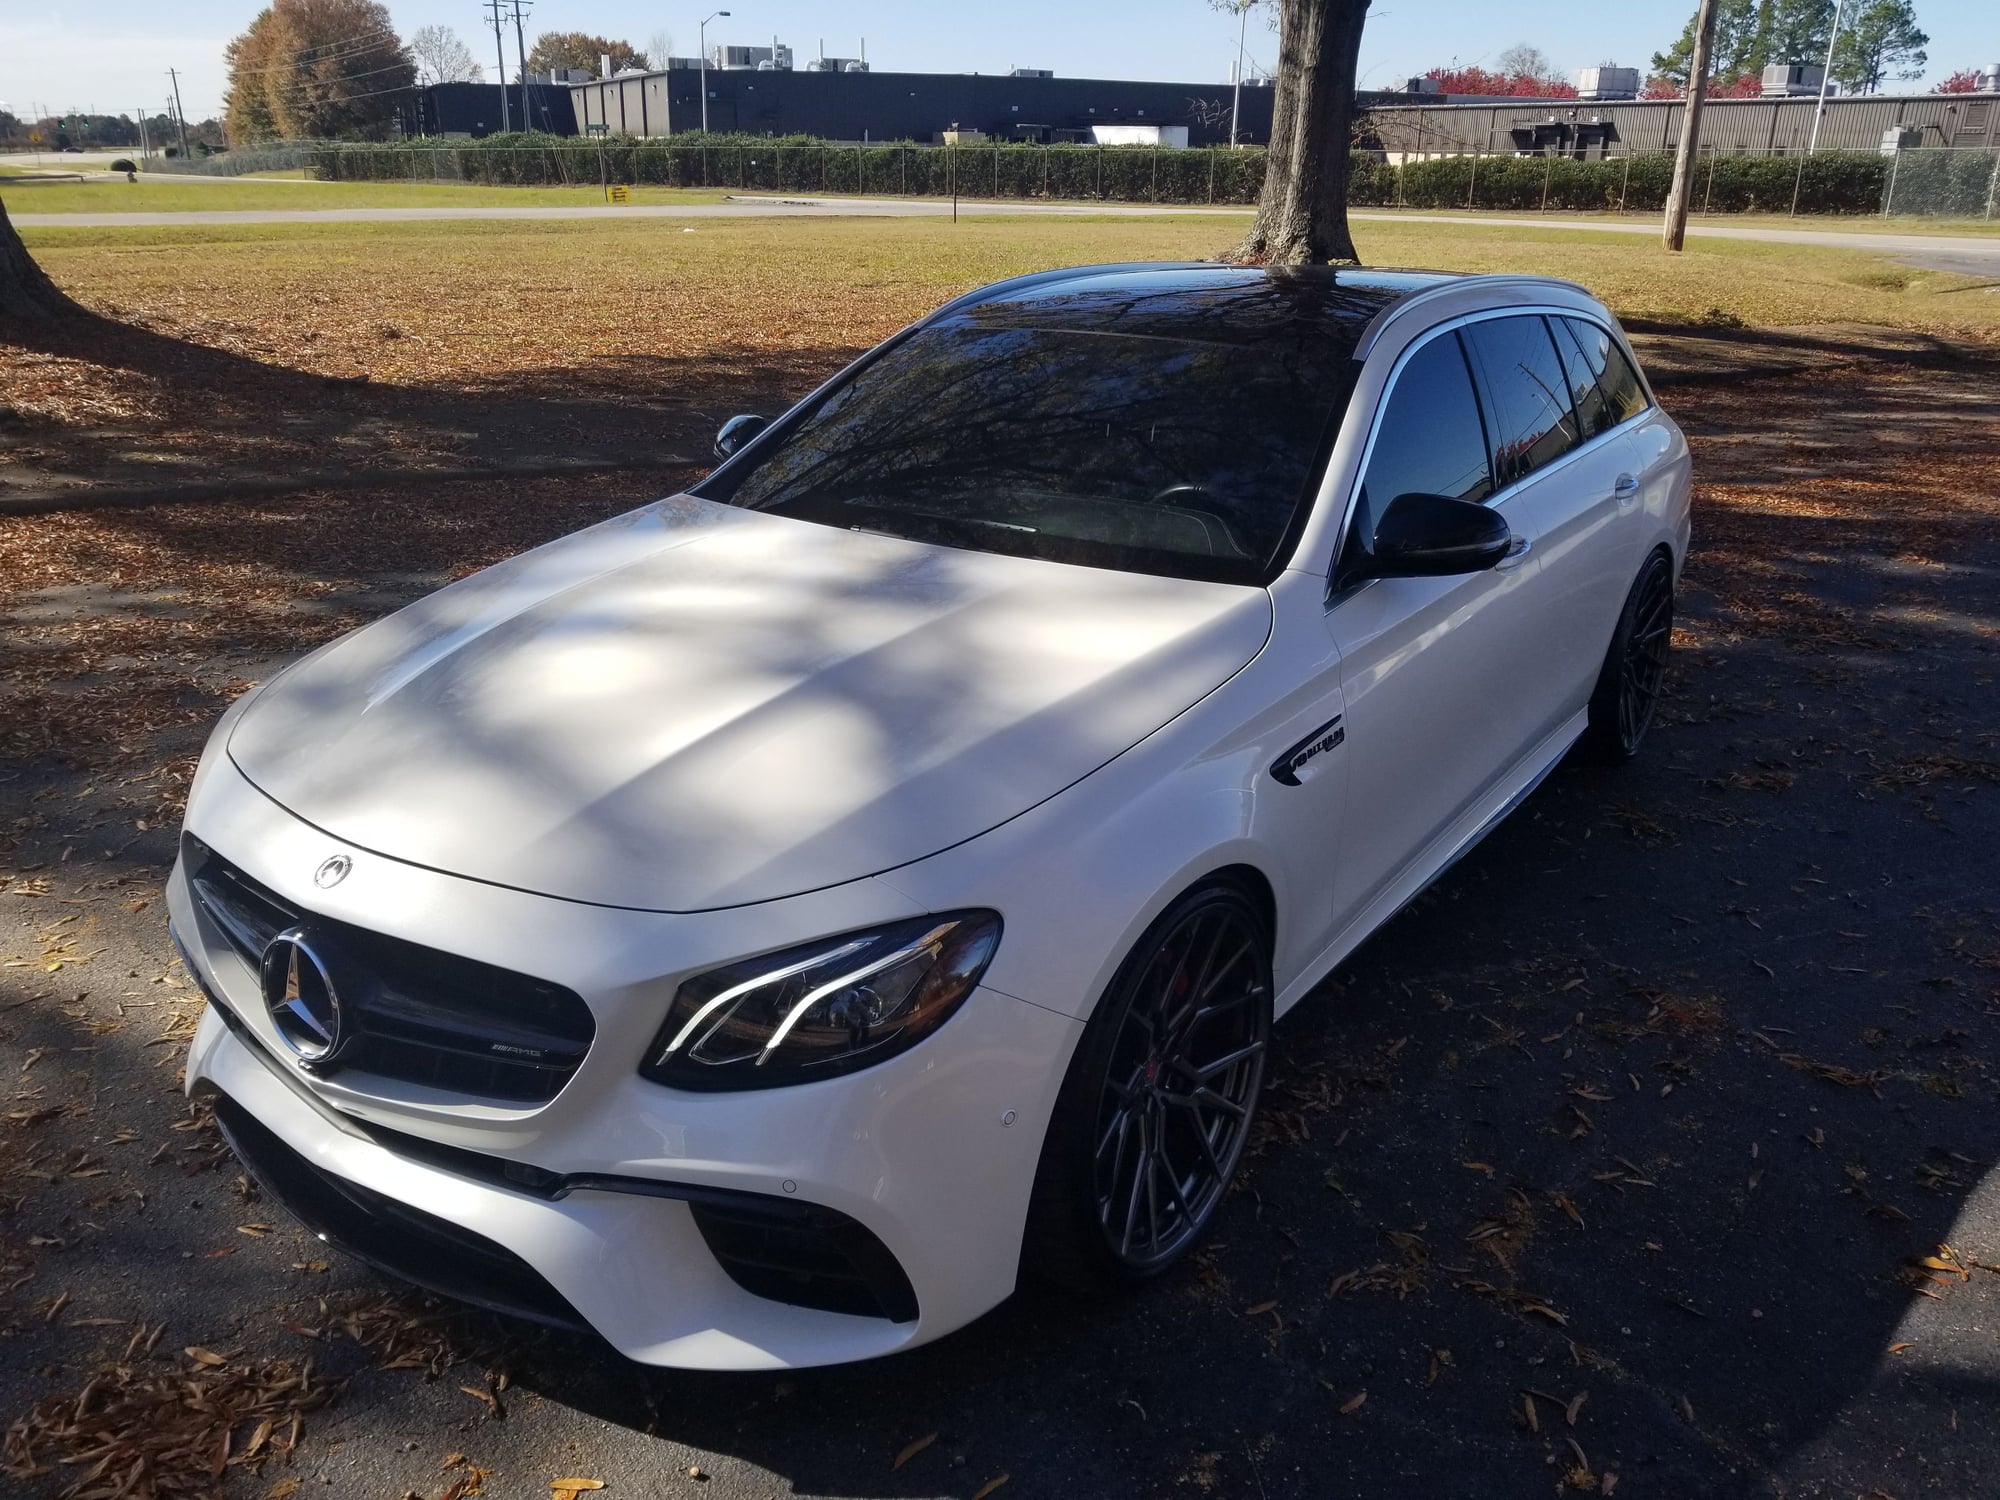 2018 Mercedes-Benz E63 AMG S - Renntech, 21" Vossen,  and more, 2018 E63S wagon, right colors and condition - Used - VIN WDDZH8KB4JA328391 - 12,900 Miles - 8 cyl - AWD - Automatic - Wagon - White - Macon, GA 31204, United States